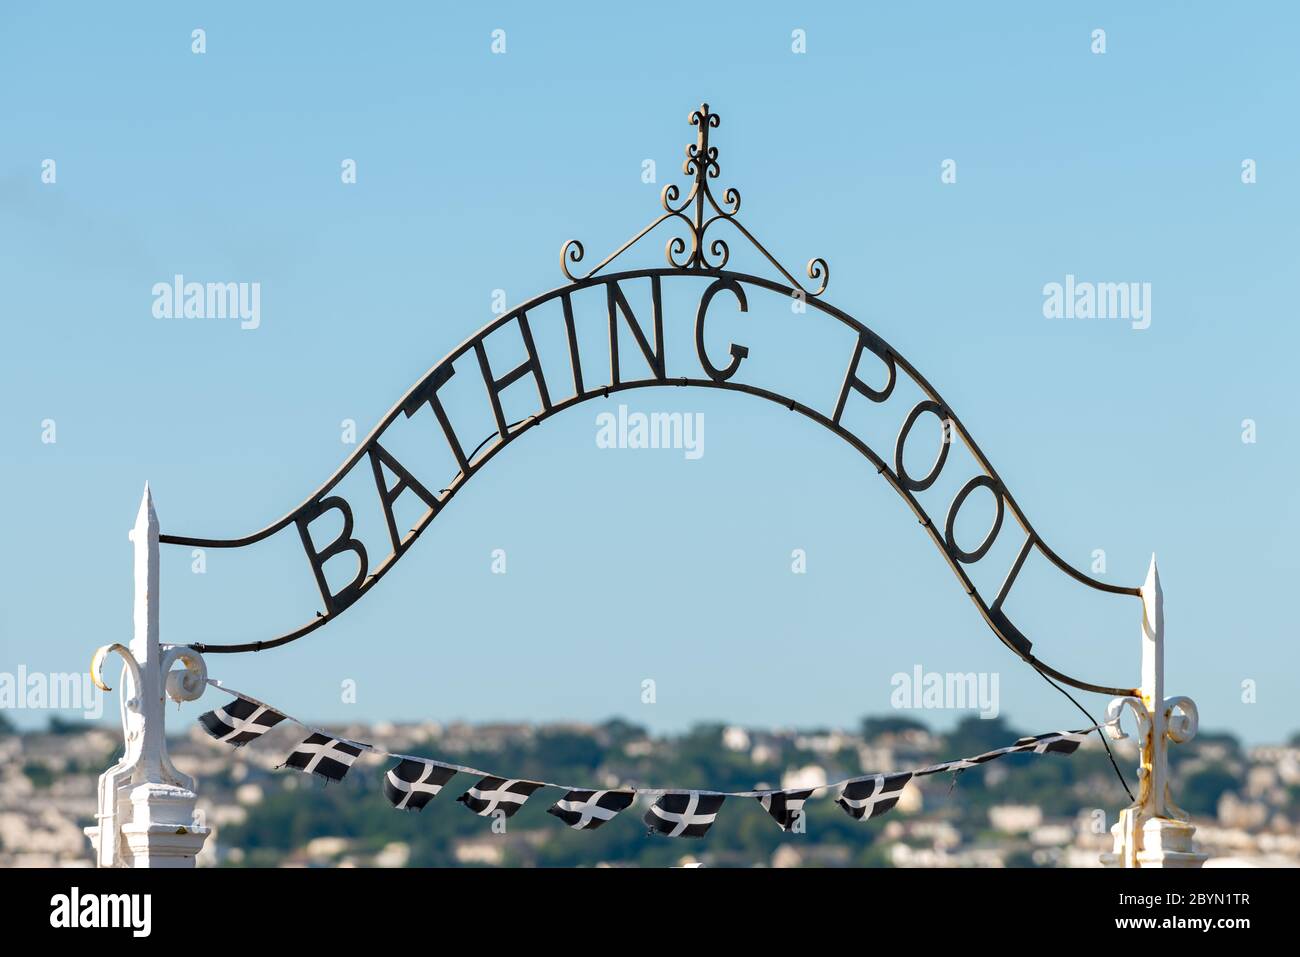 A Bathing Pool sign at the Jubilee Bathing Pool Lido in Penzance, Cornwall, UK. Stock Photo